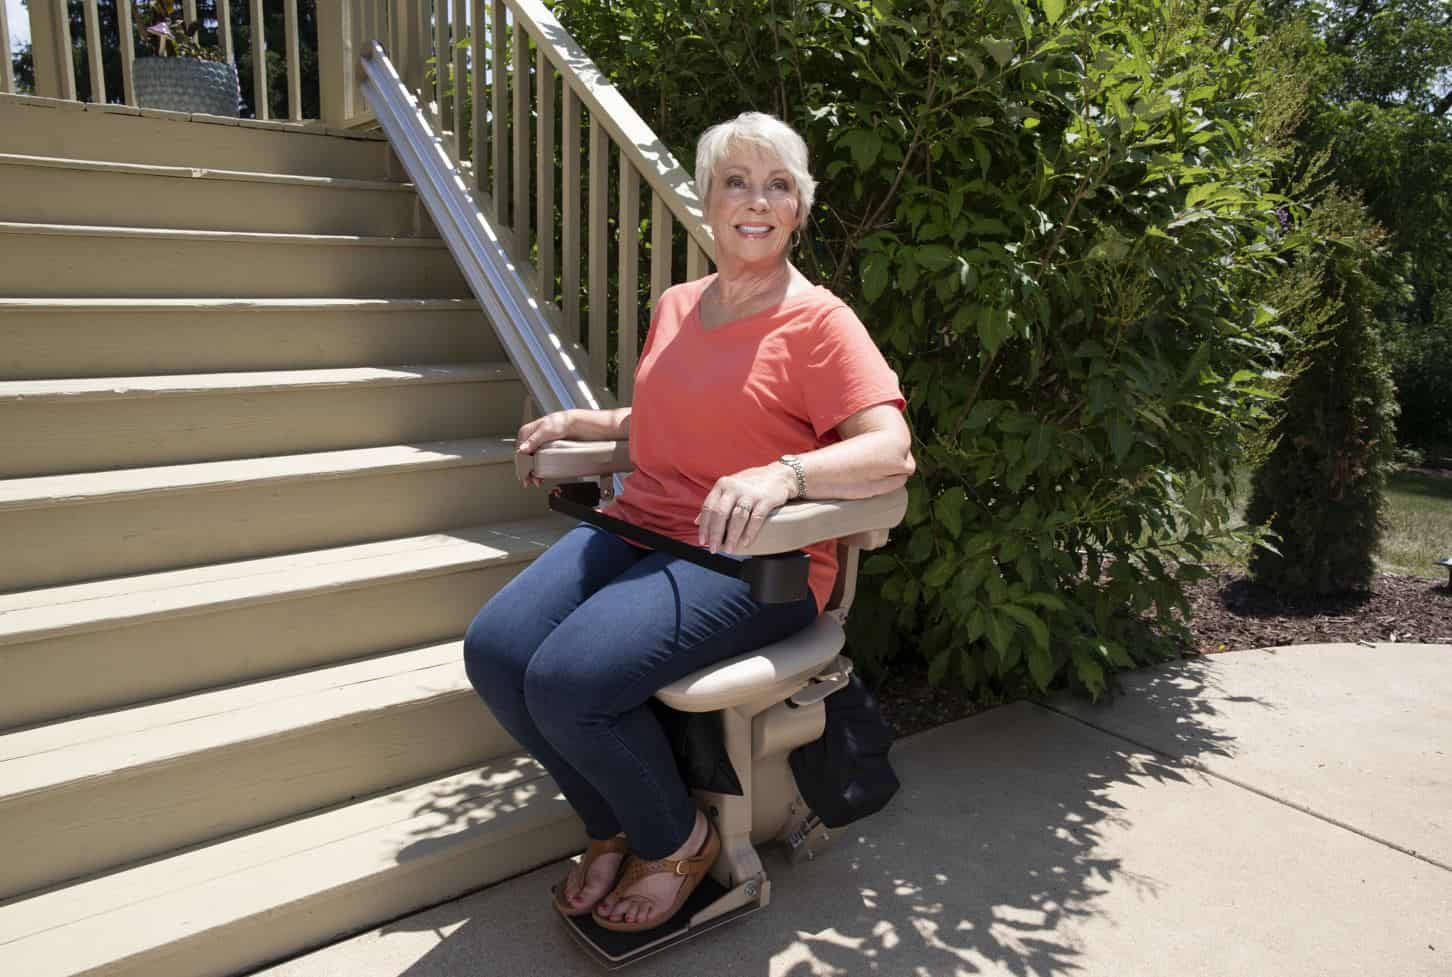 woman riding new outdoor Bruno stairlift from Lifeway Mobility